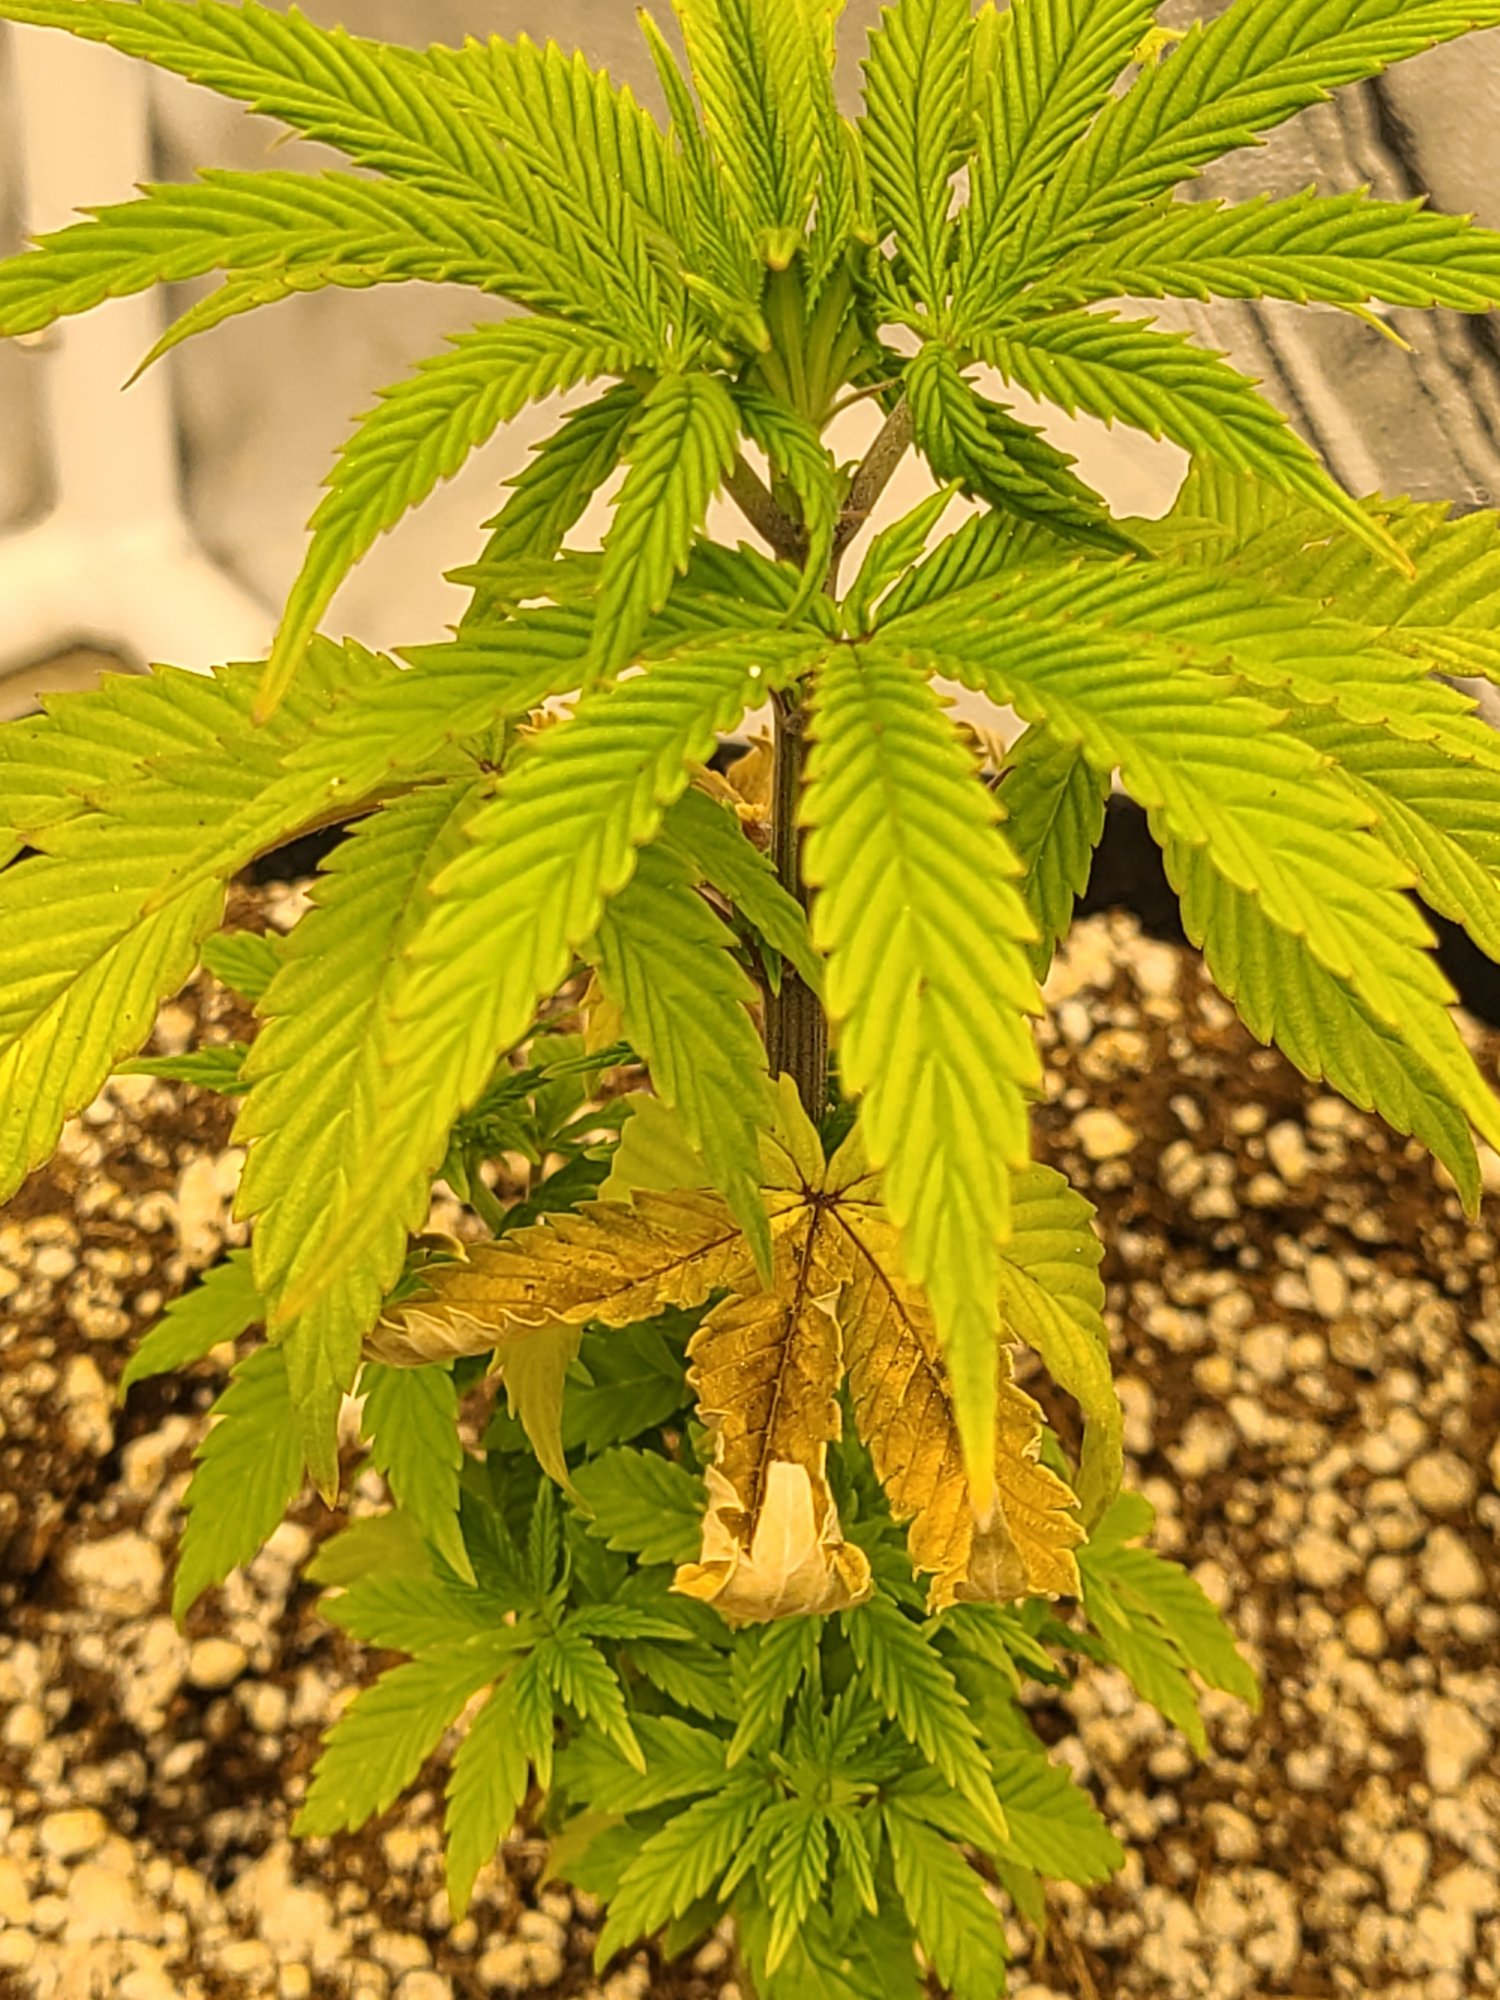 Is this nitrogen deficiency or 2